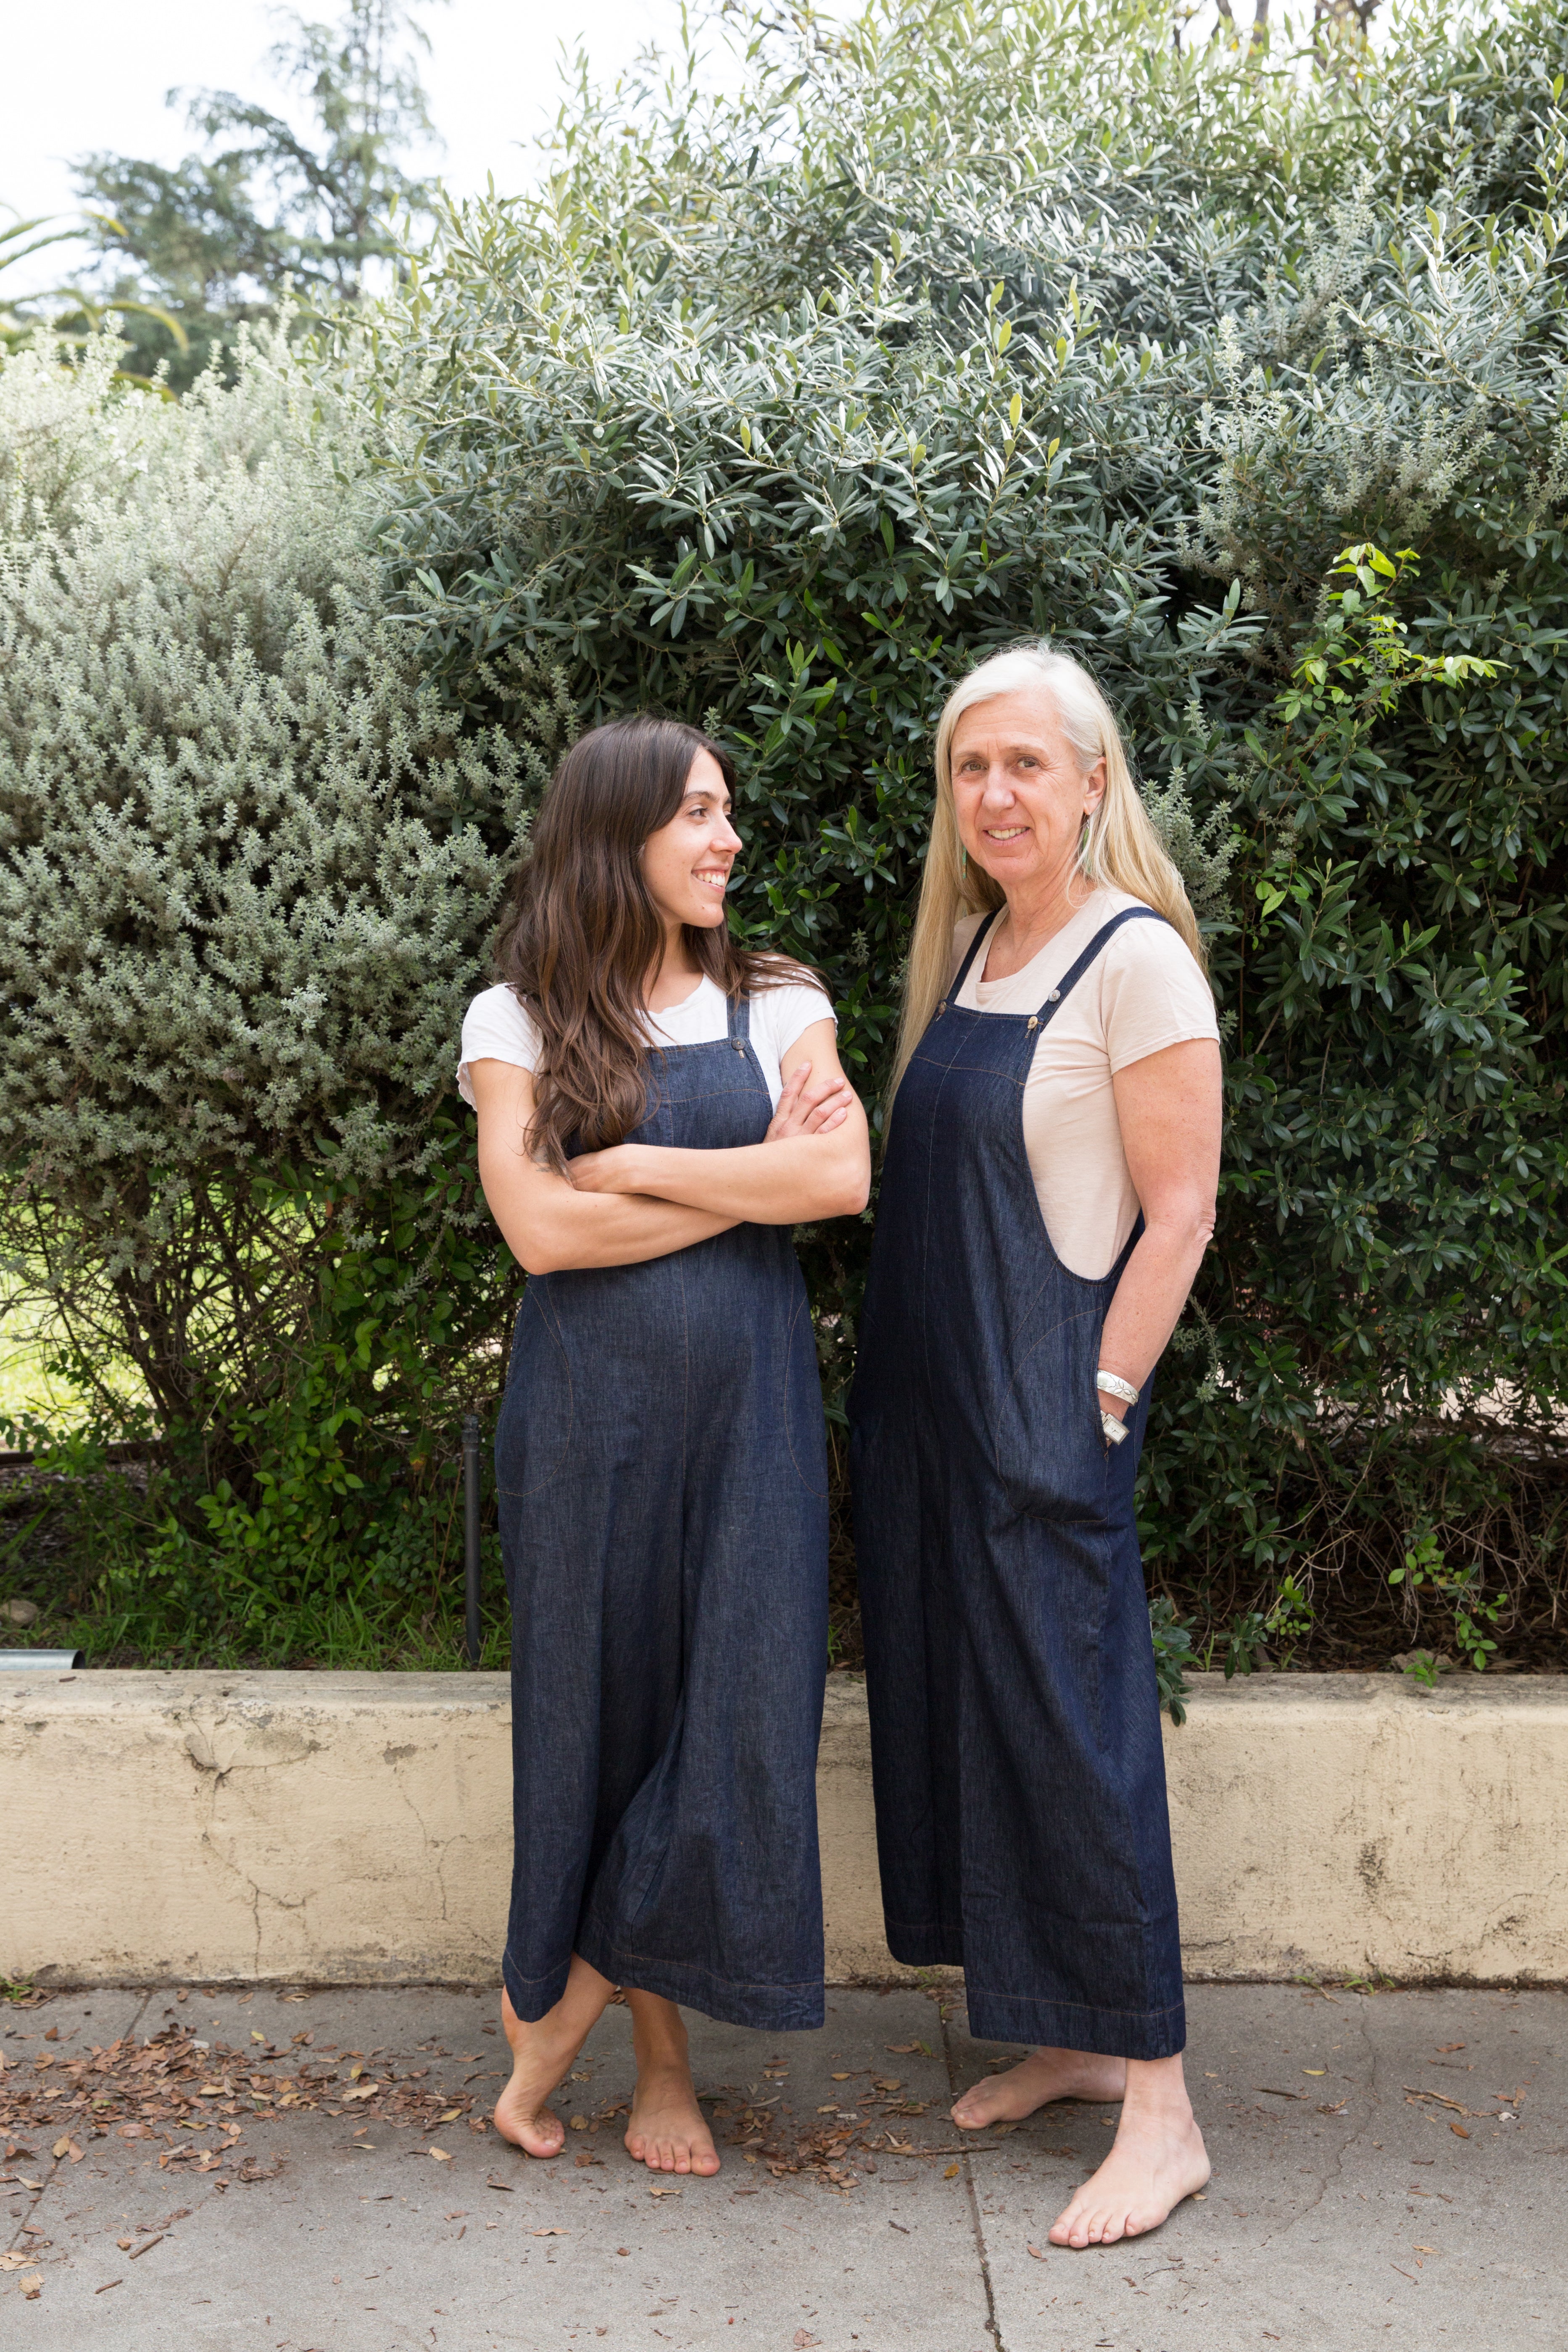 Dotter owners, Annika Huston and Susanne McLean, wearing denim jumpsuits in front of bushes